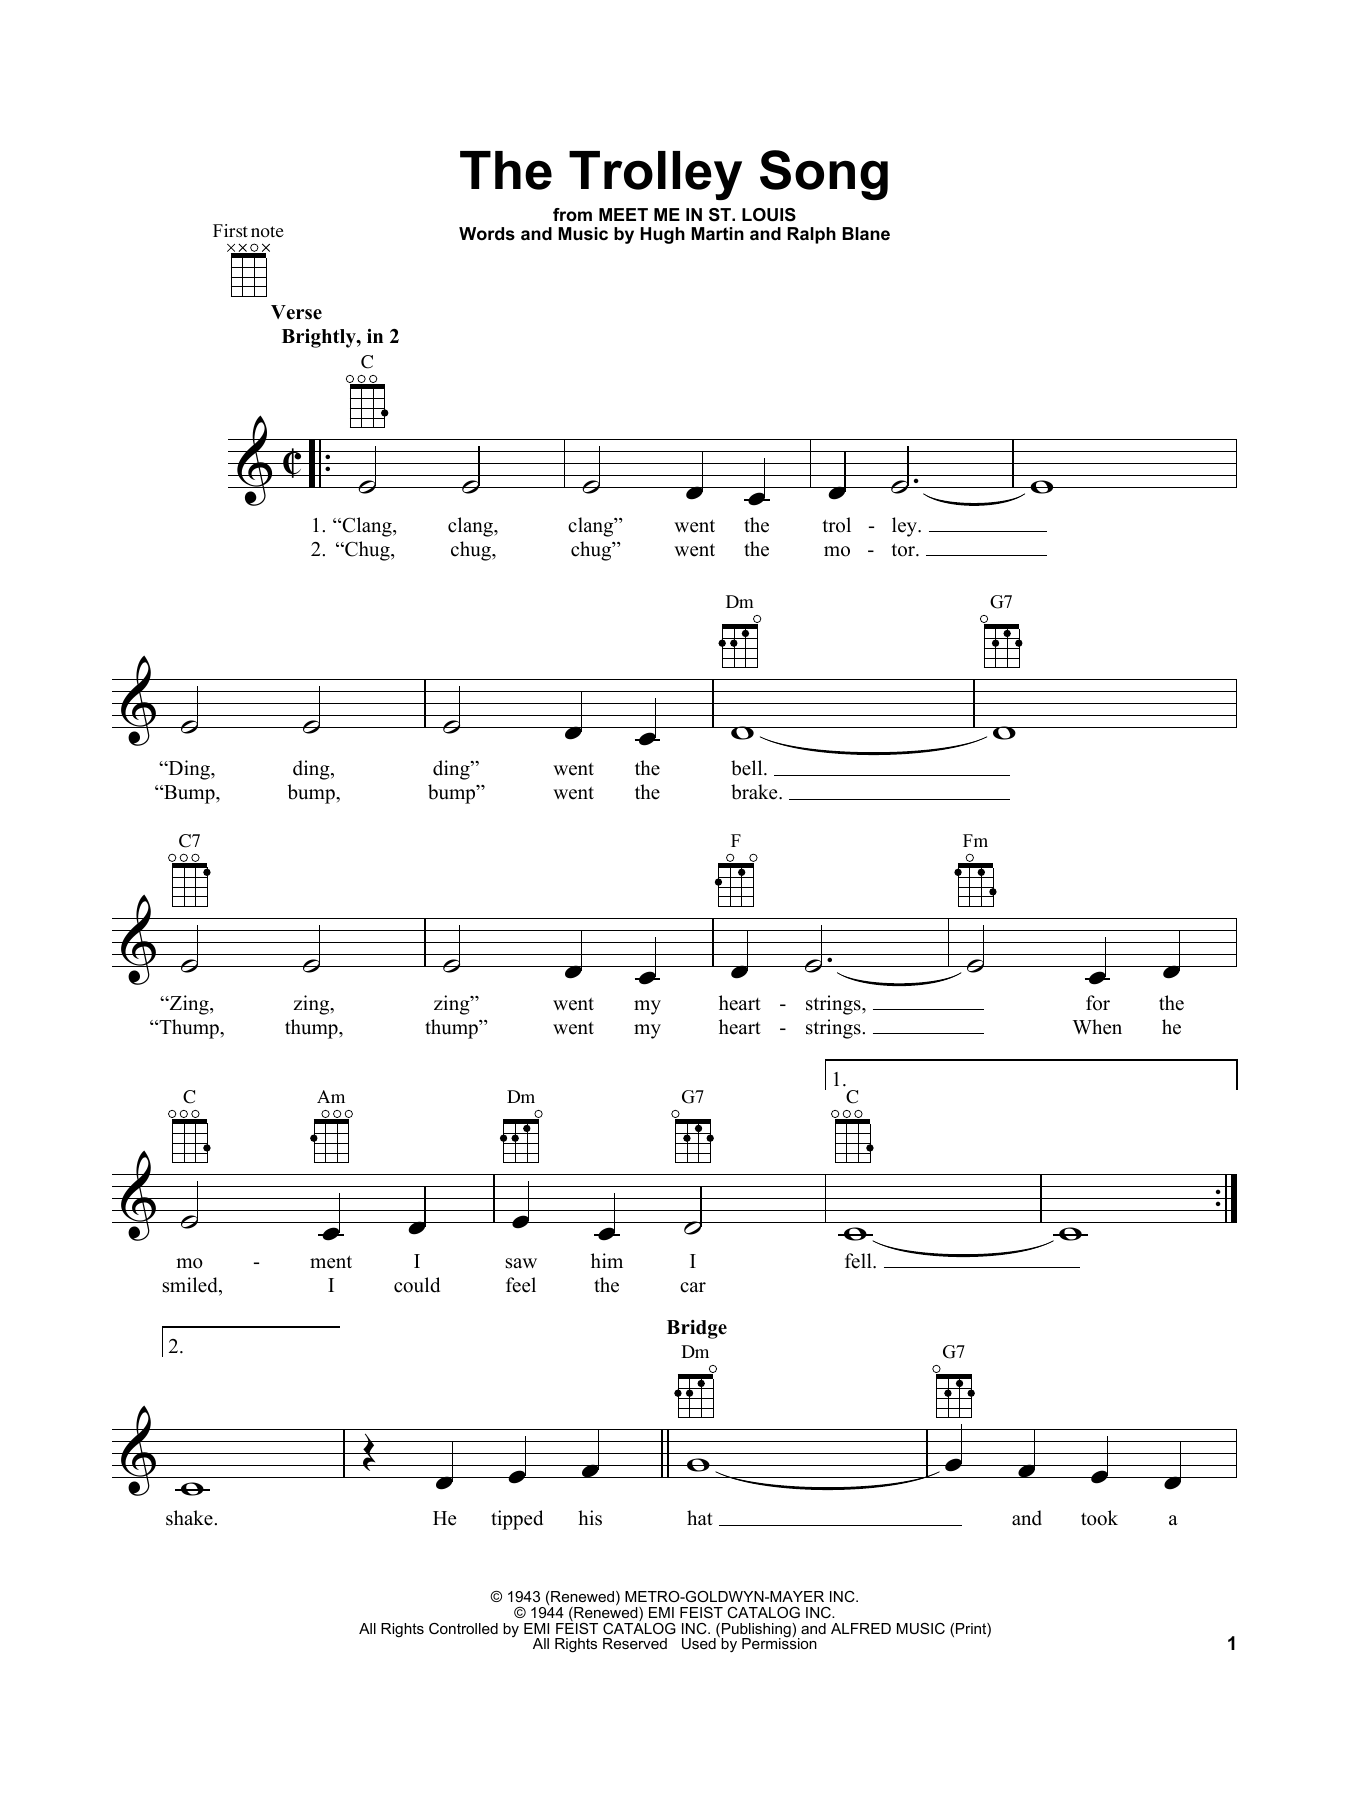 Download Judy Garland The Trolley Song Sheet Music